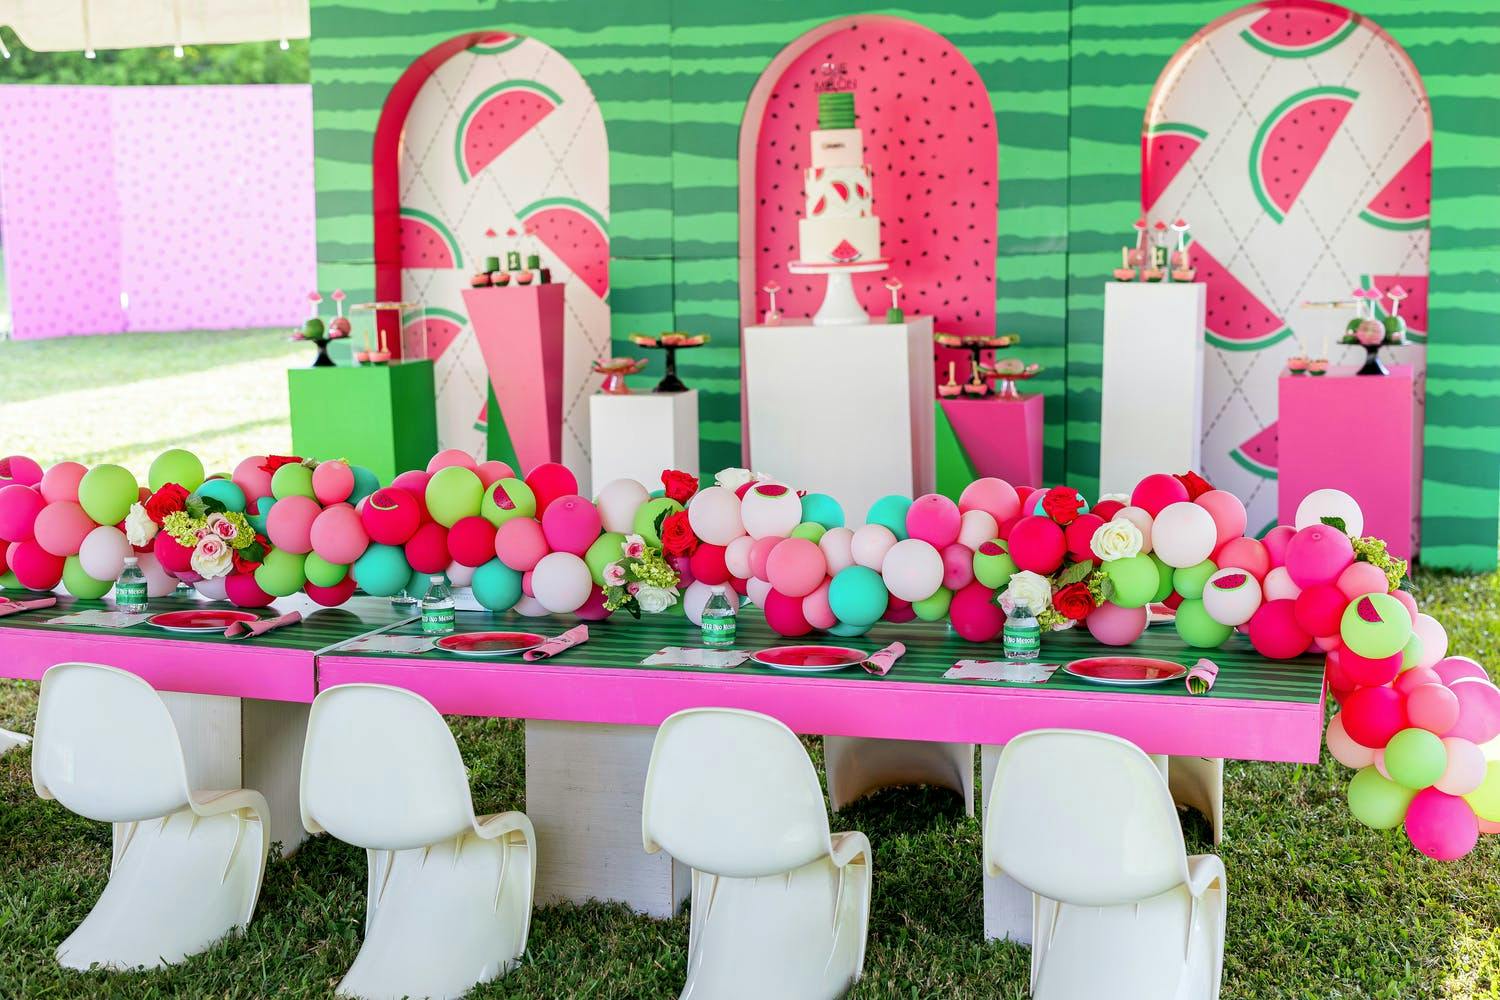 Watermelon themed Birthday Party With Vibrant Pink and Green Colors at the Tablescape | PartySlate